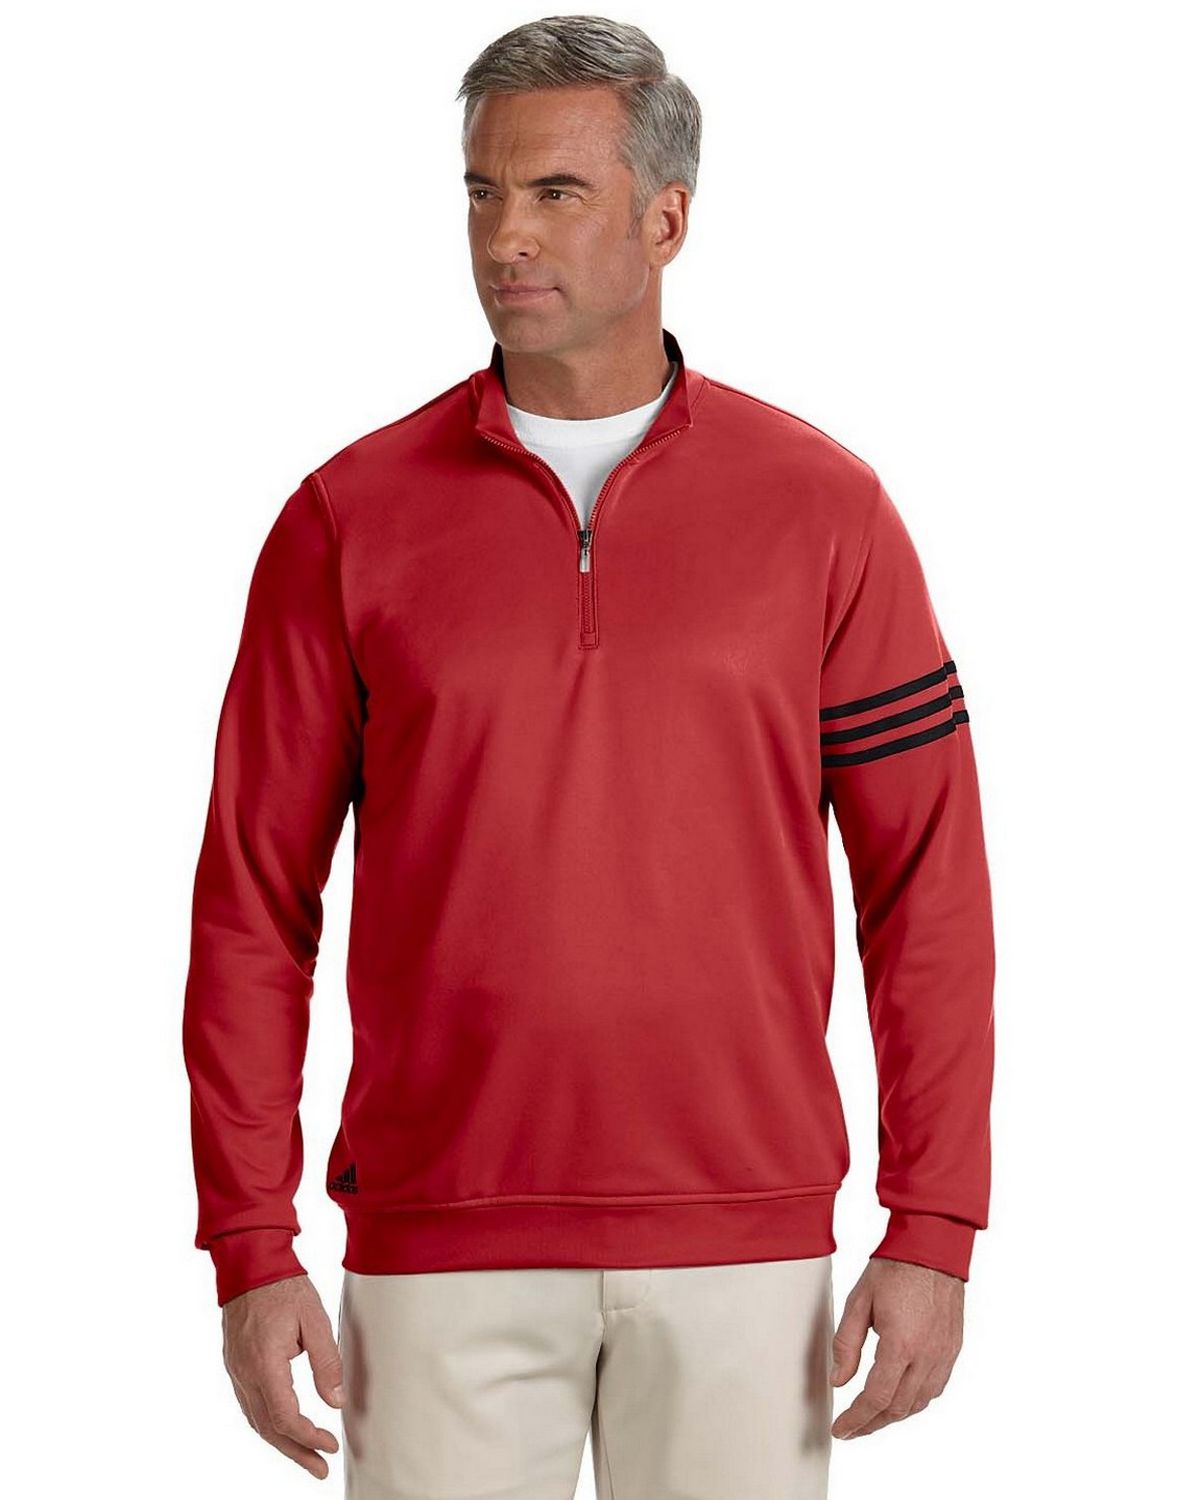 Adidas Golf A190 Men's ClimaLite Pullover